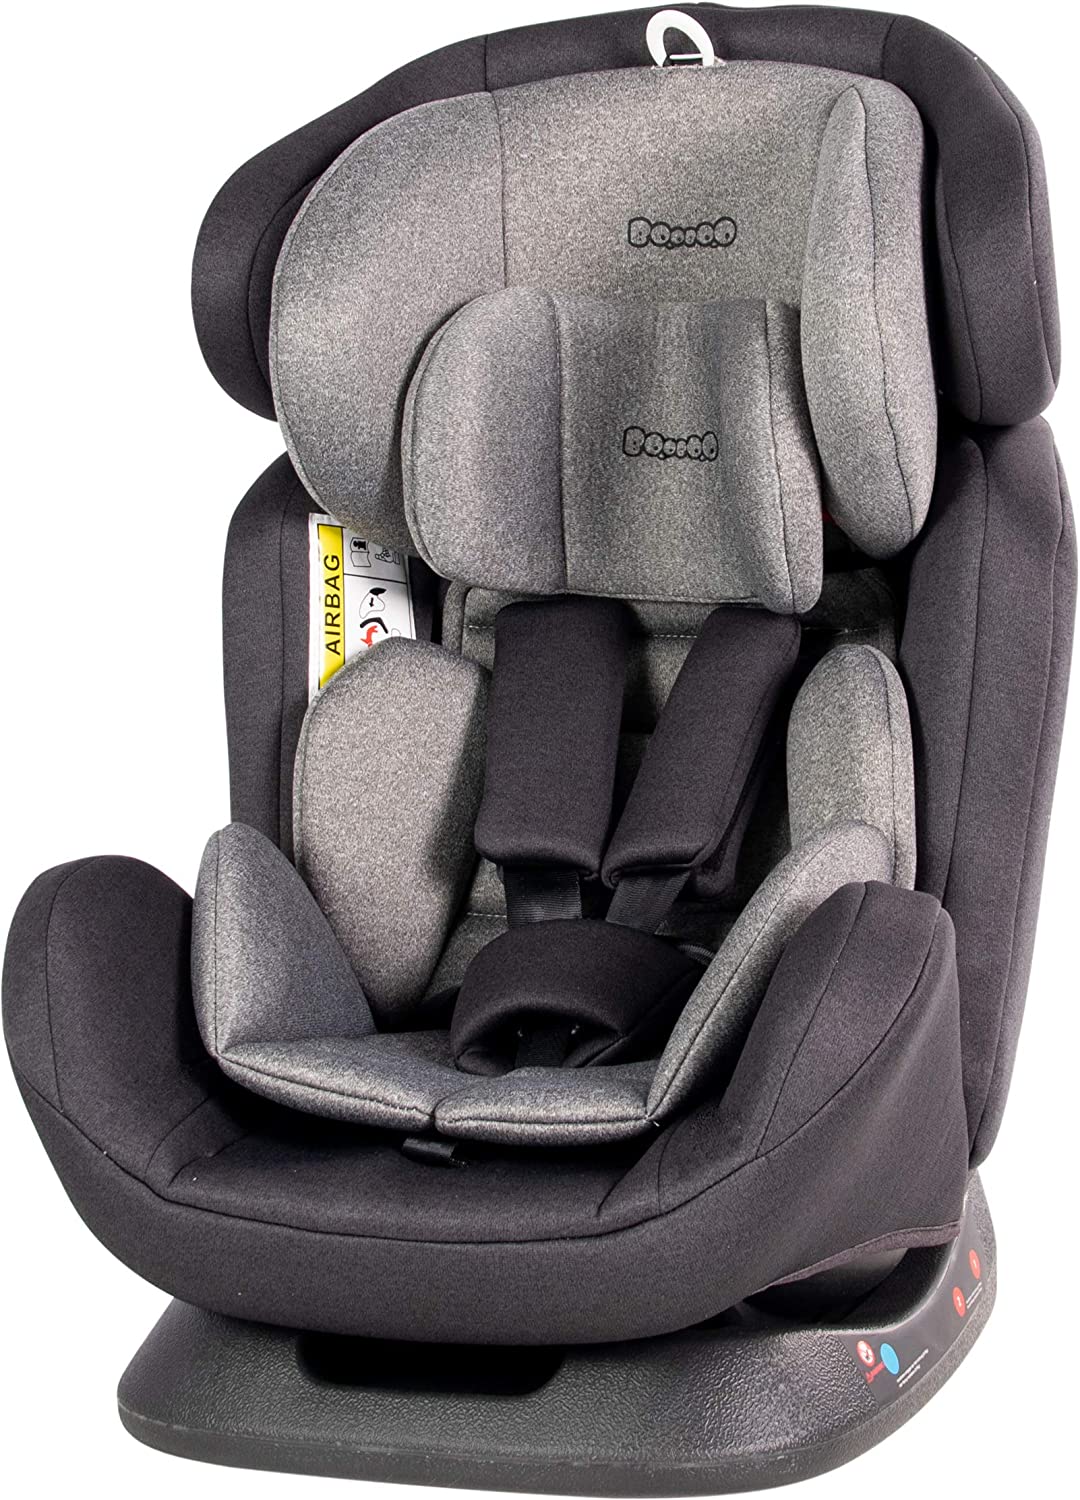 Osann Booboo Fino Child Car Seat and Reboarder for All Ages Group 0+/1/2/3 (0-36 kg) Dark Grey Melange